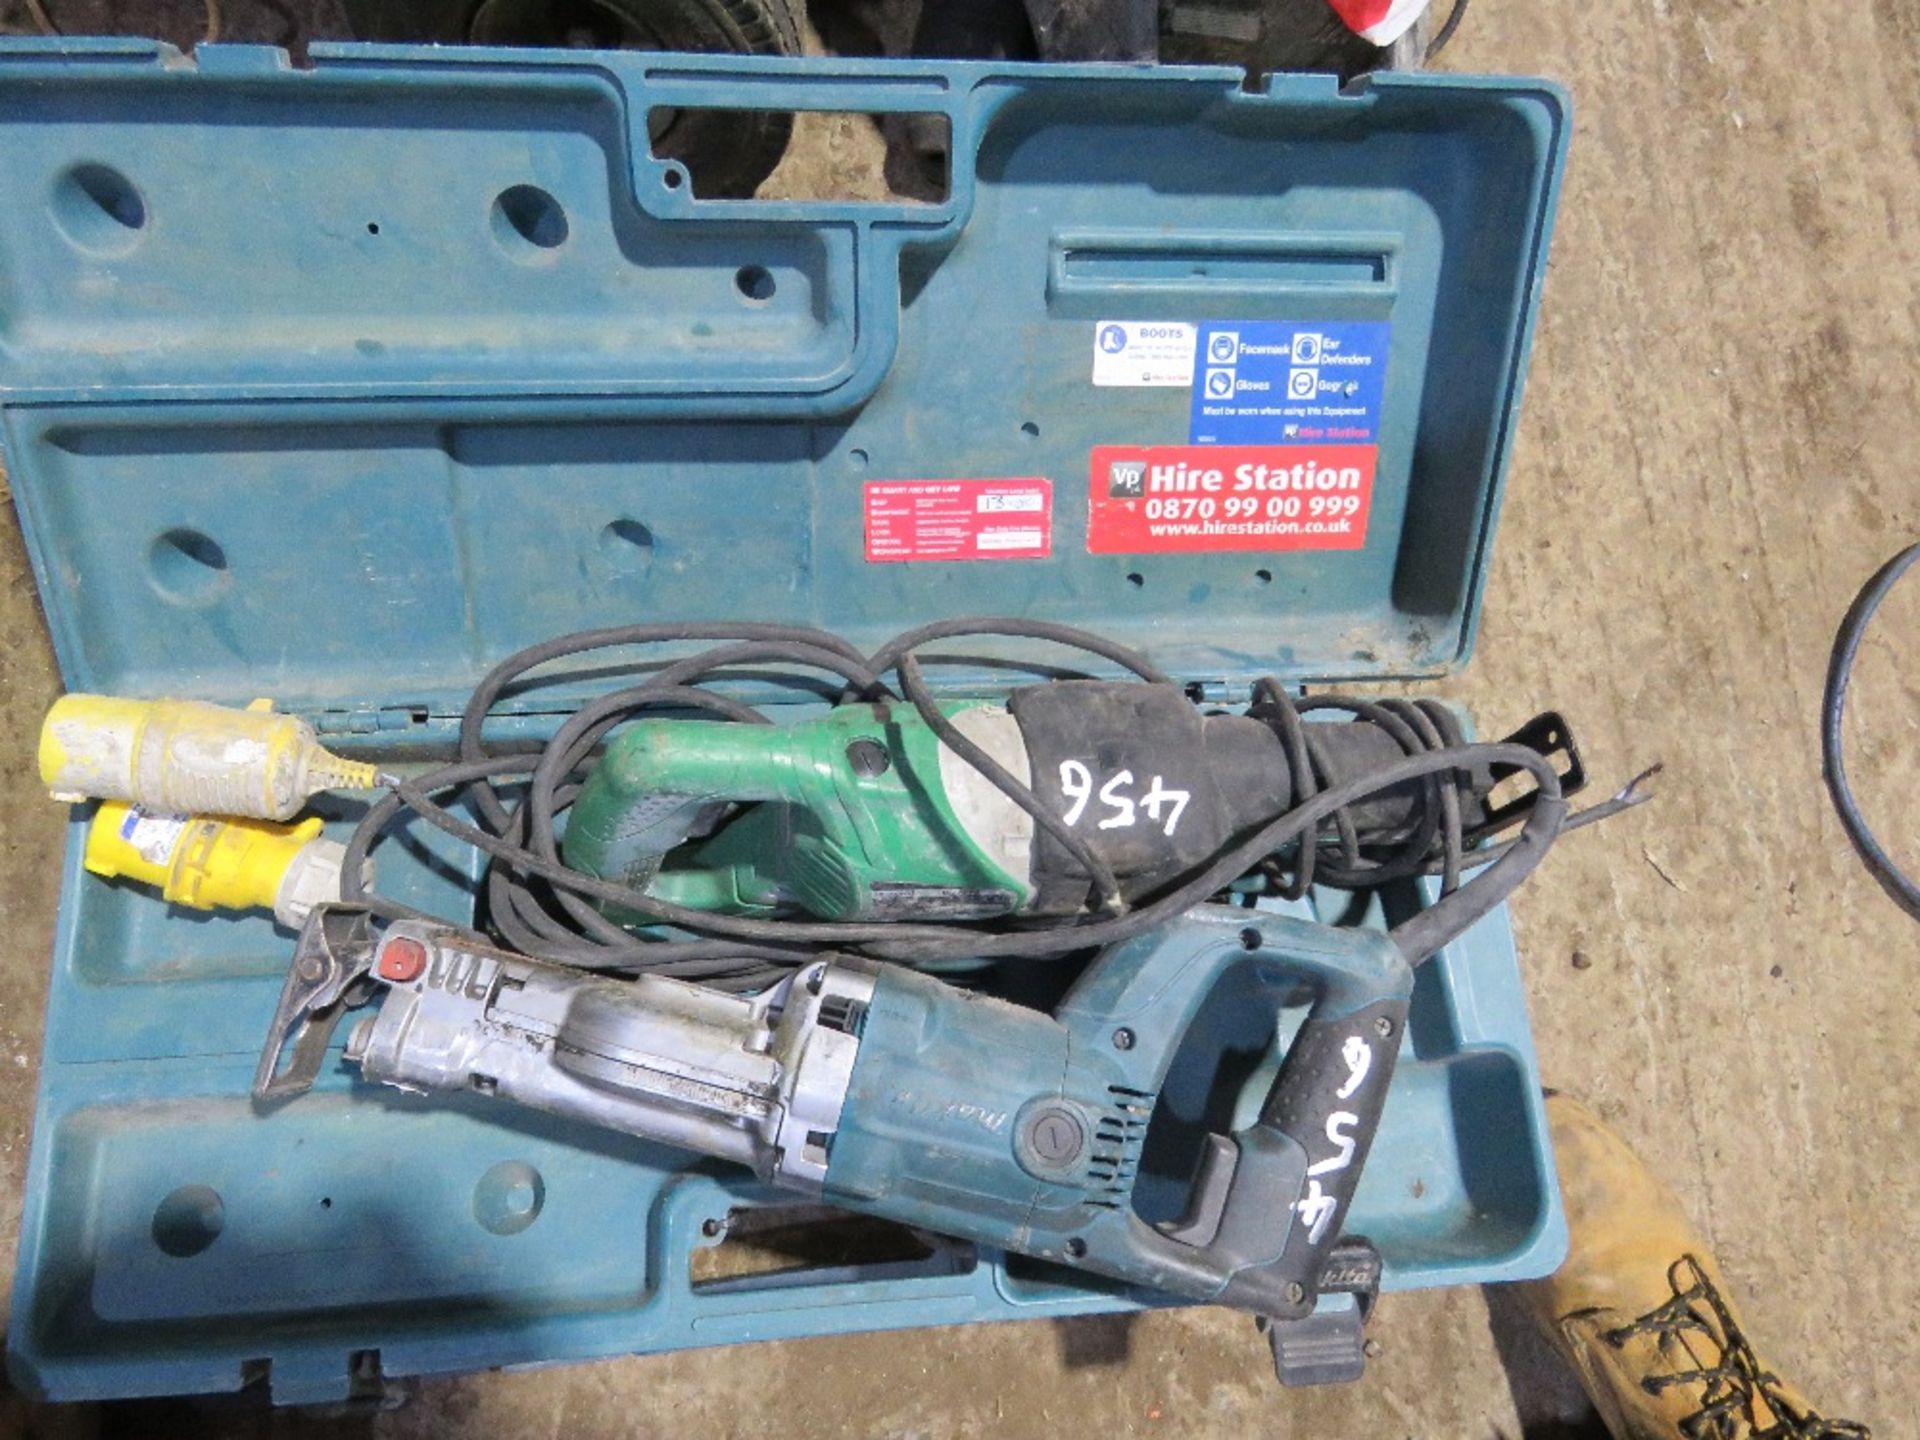 4 X RECIPROCATING SAWS. 110VOLT POWERED. SOURCED FROM COMPANY LIQUIDATION. THIS LOT IS SOLD UNDE